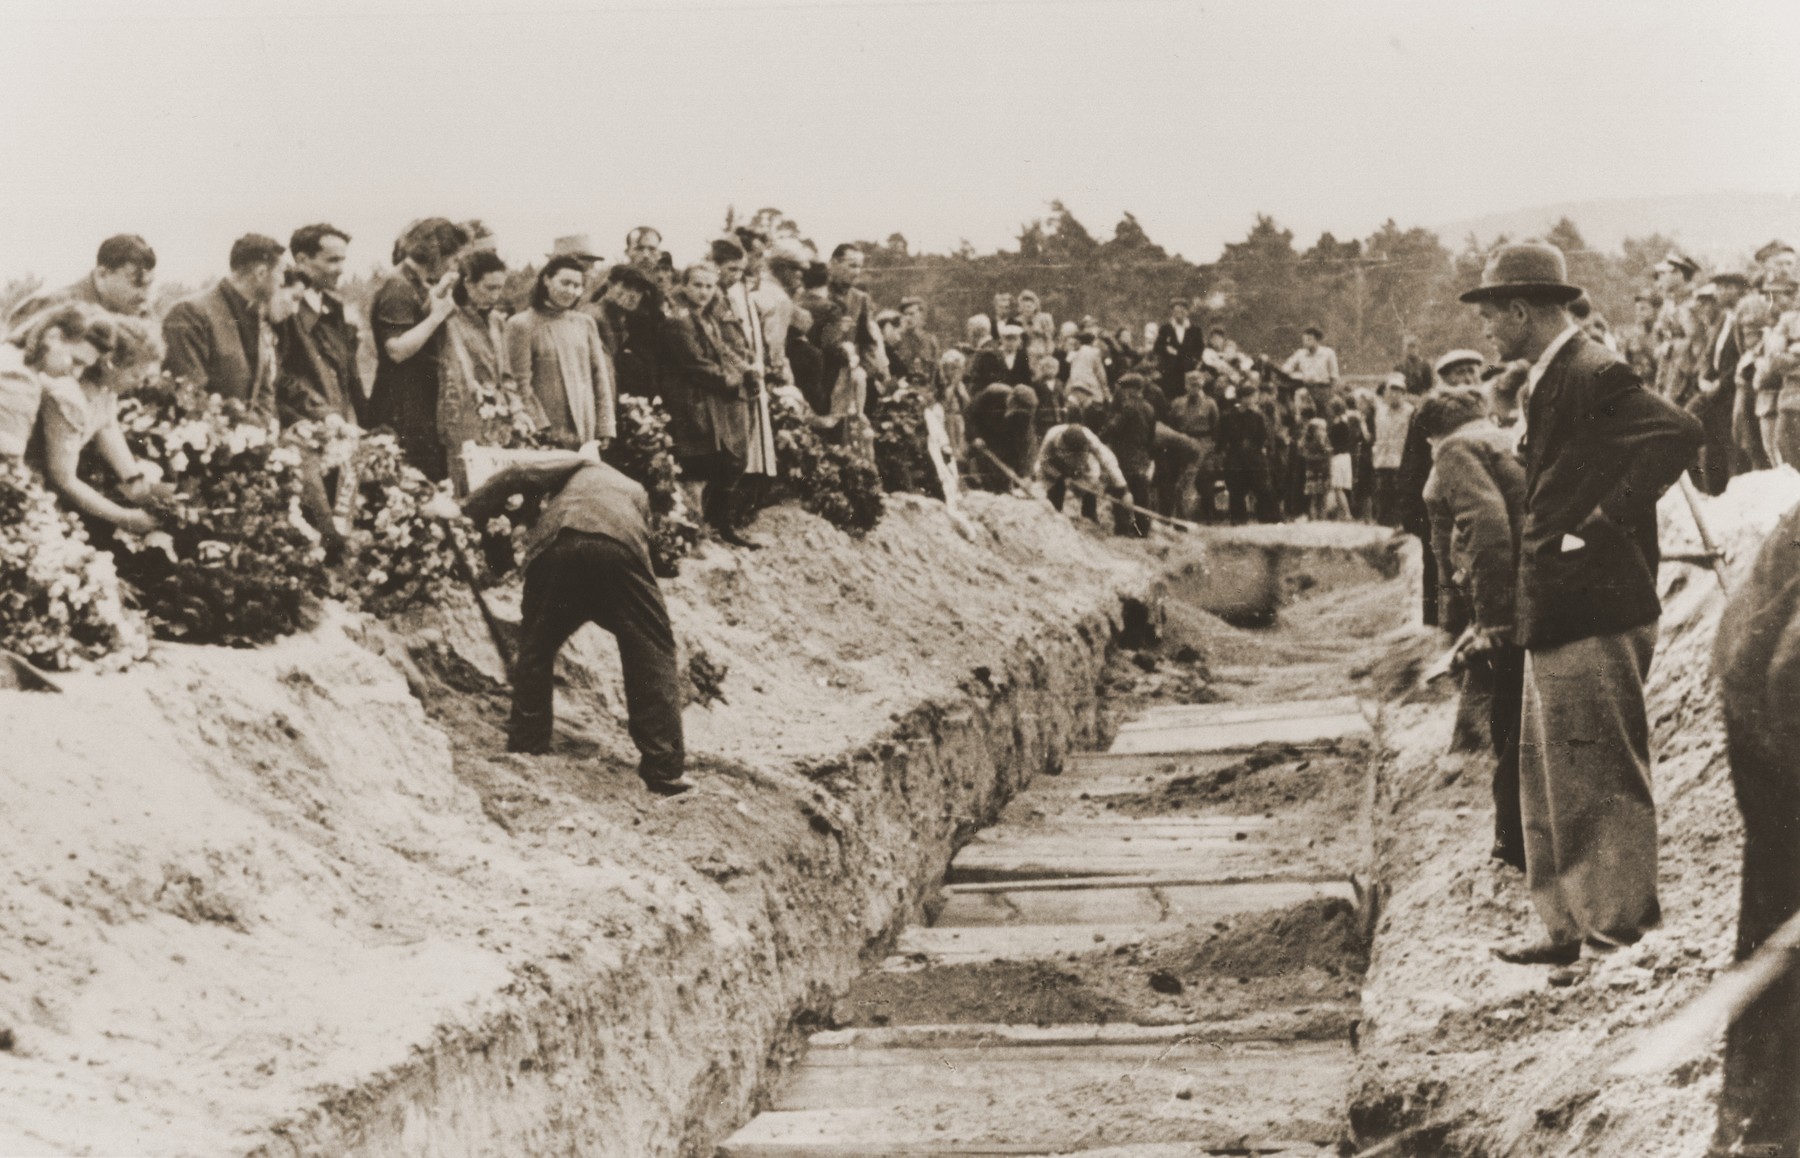 Mourners and local residents shovel dirt into the mass grave of the victims of the Kielce pogrom during the public burial.